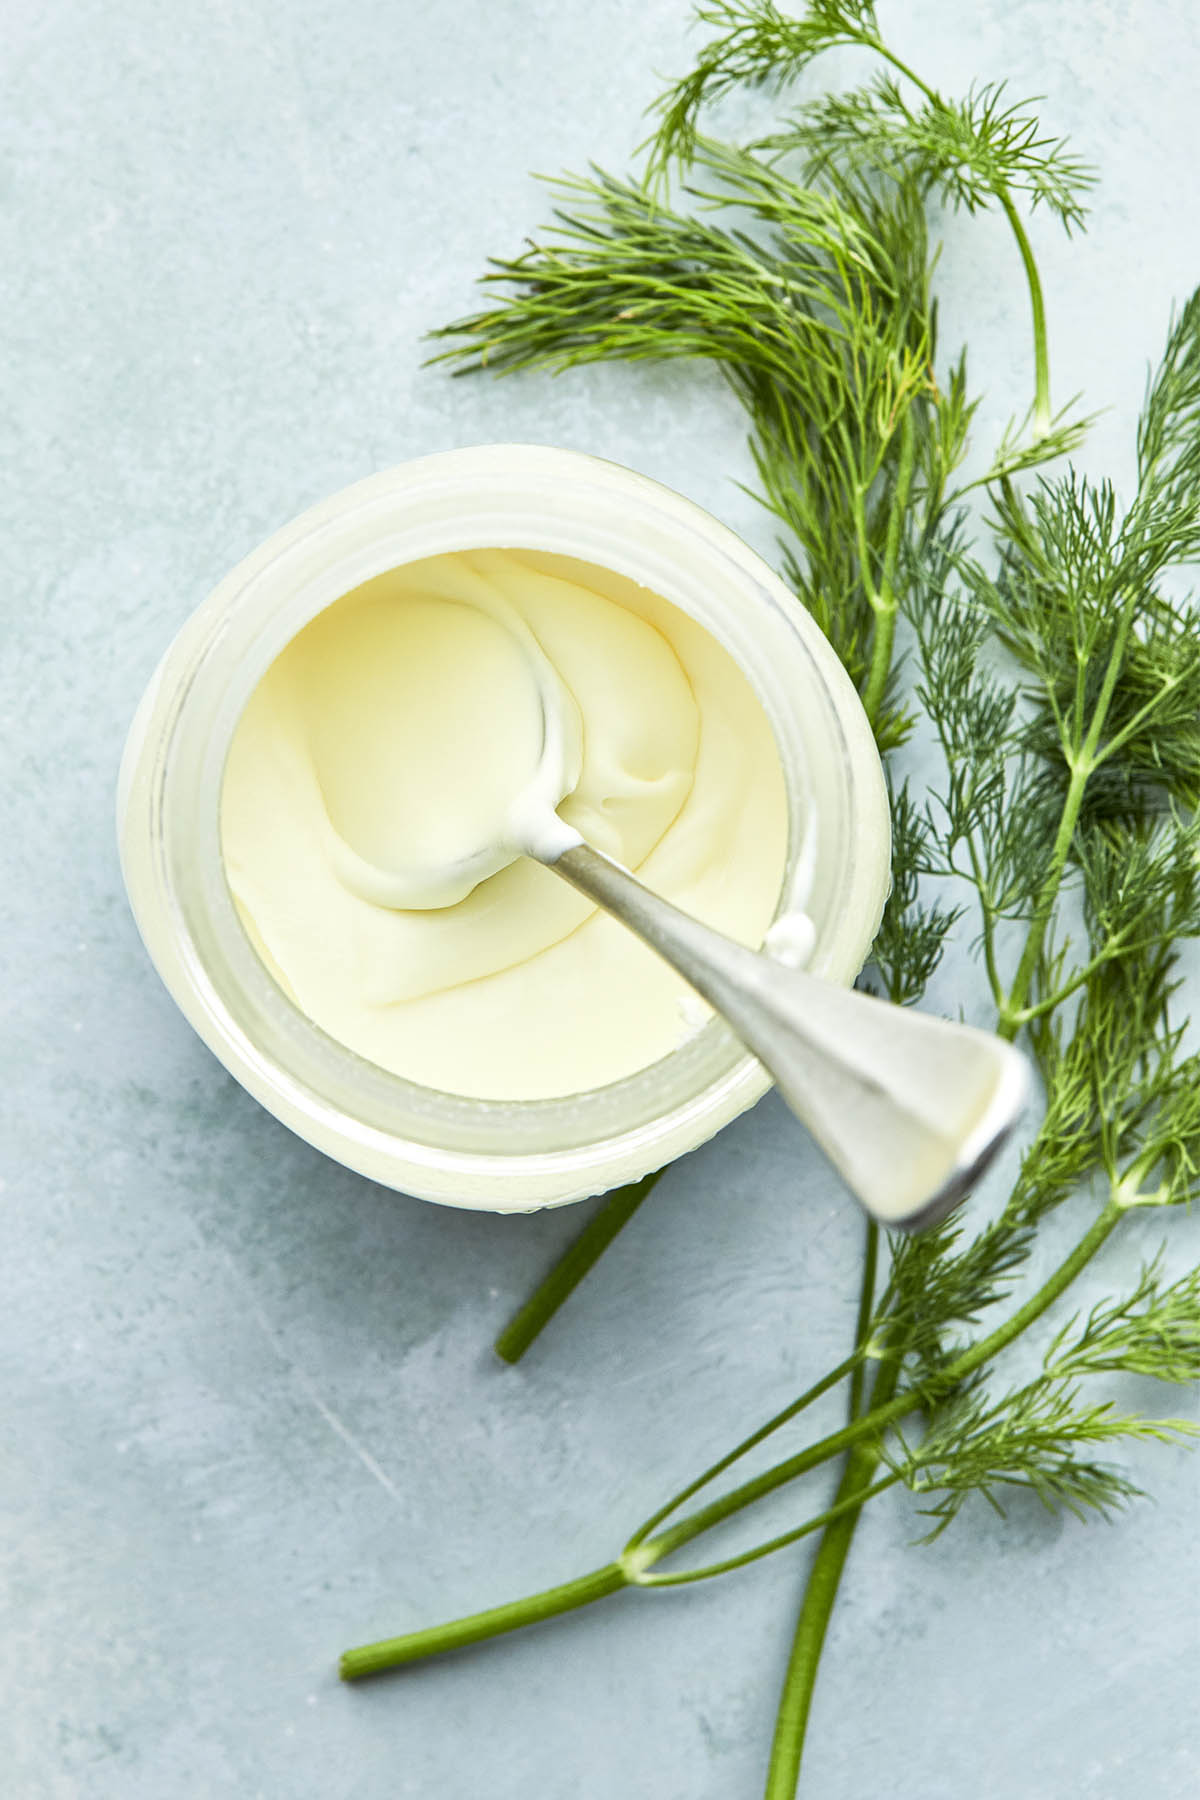 A jar of crème fraîche with a spoon inside the jar and fresh dill laying on the surface next to the jar.